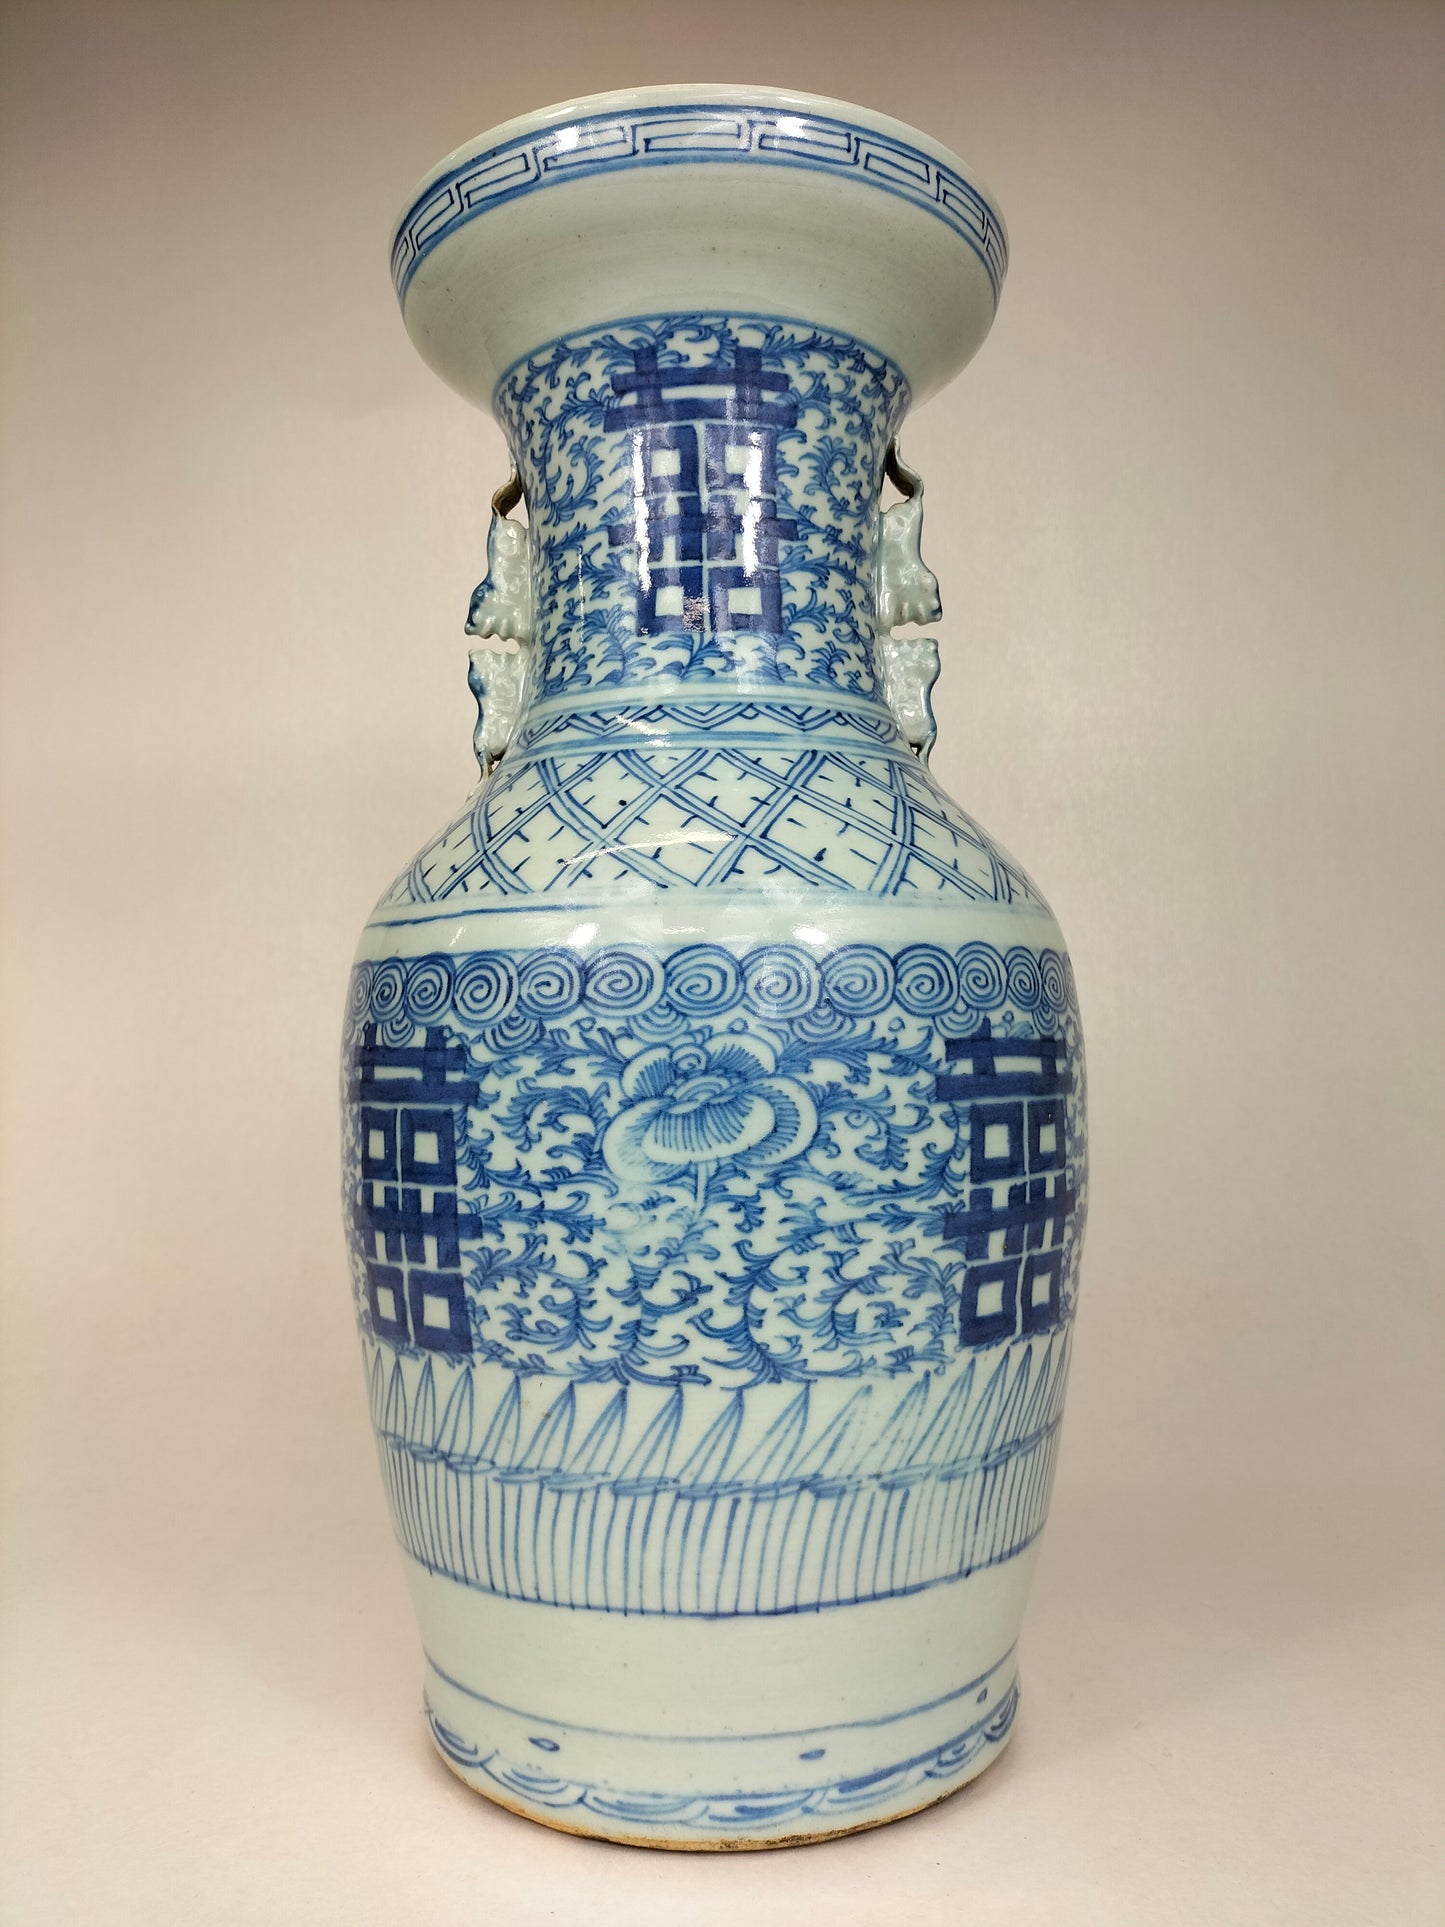 Antique Chinese double happiness wedding vase // Qing Dynasty - 19th century